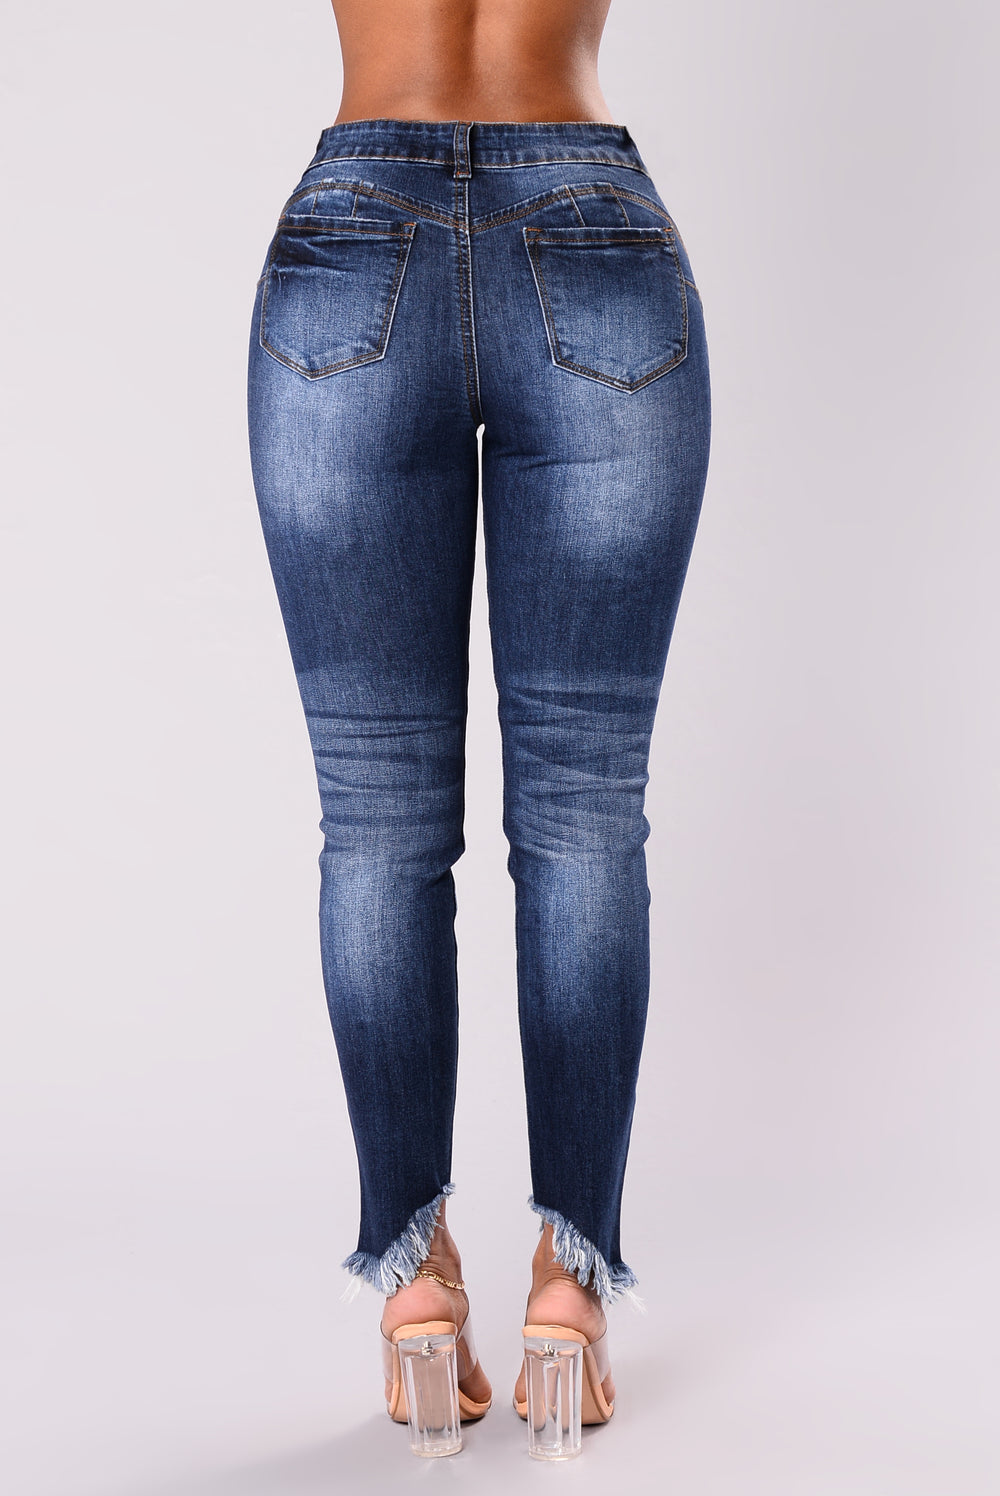 Something About These Booty Lifting Jeans - Dark Wash